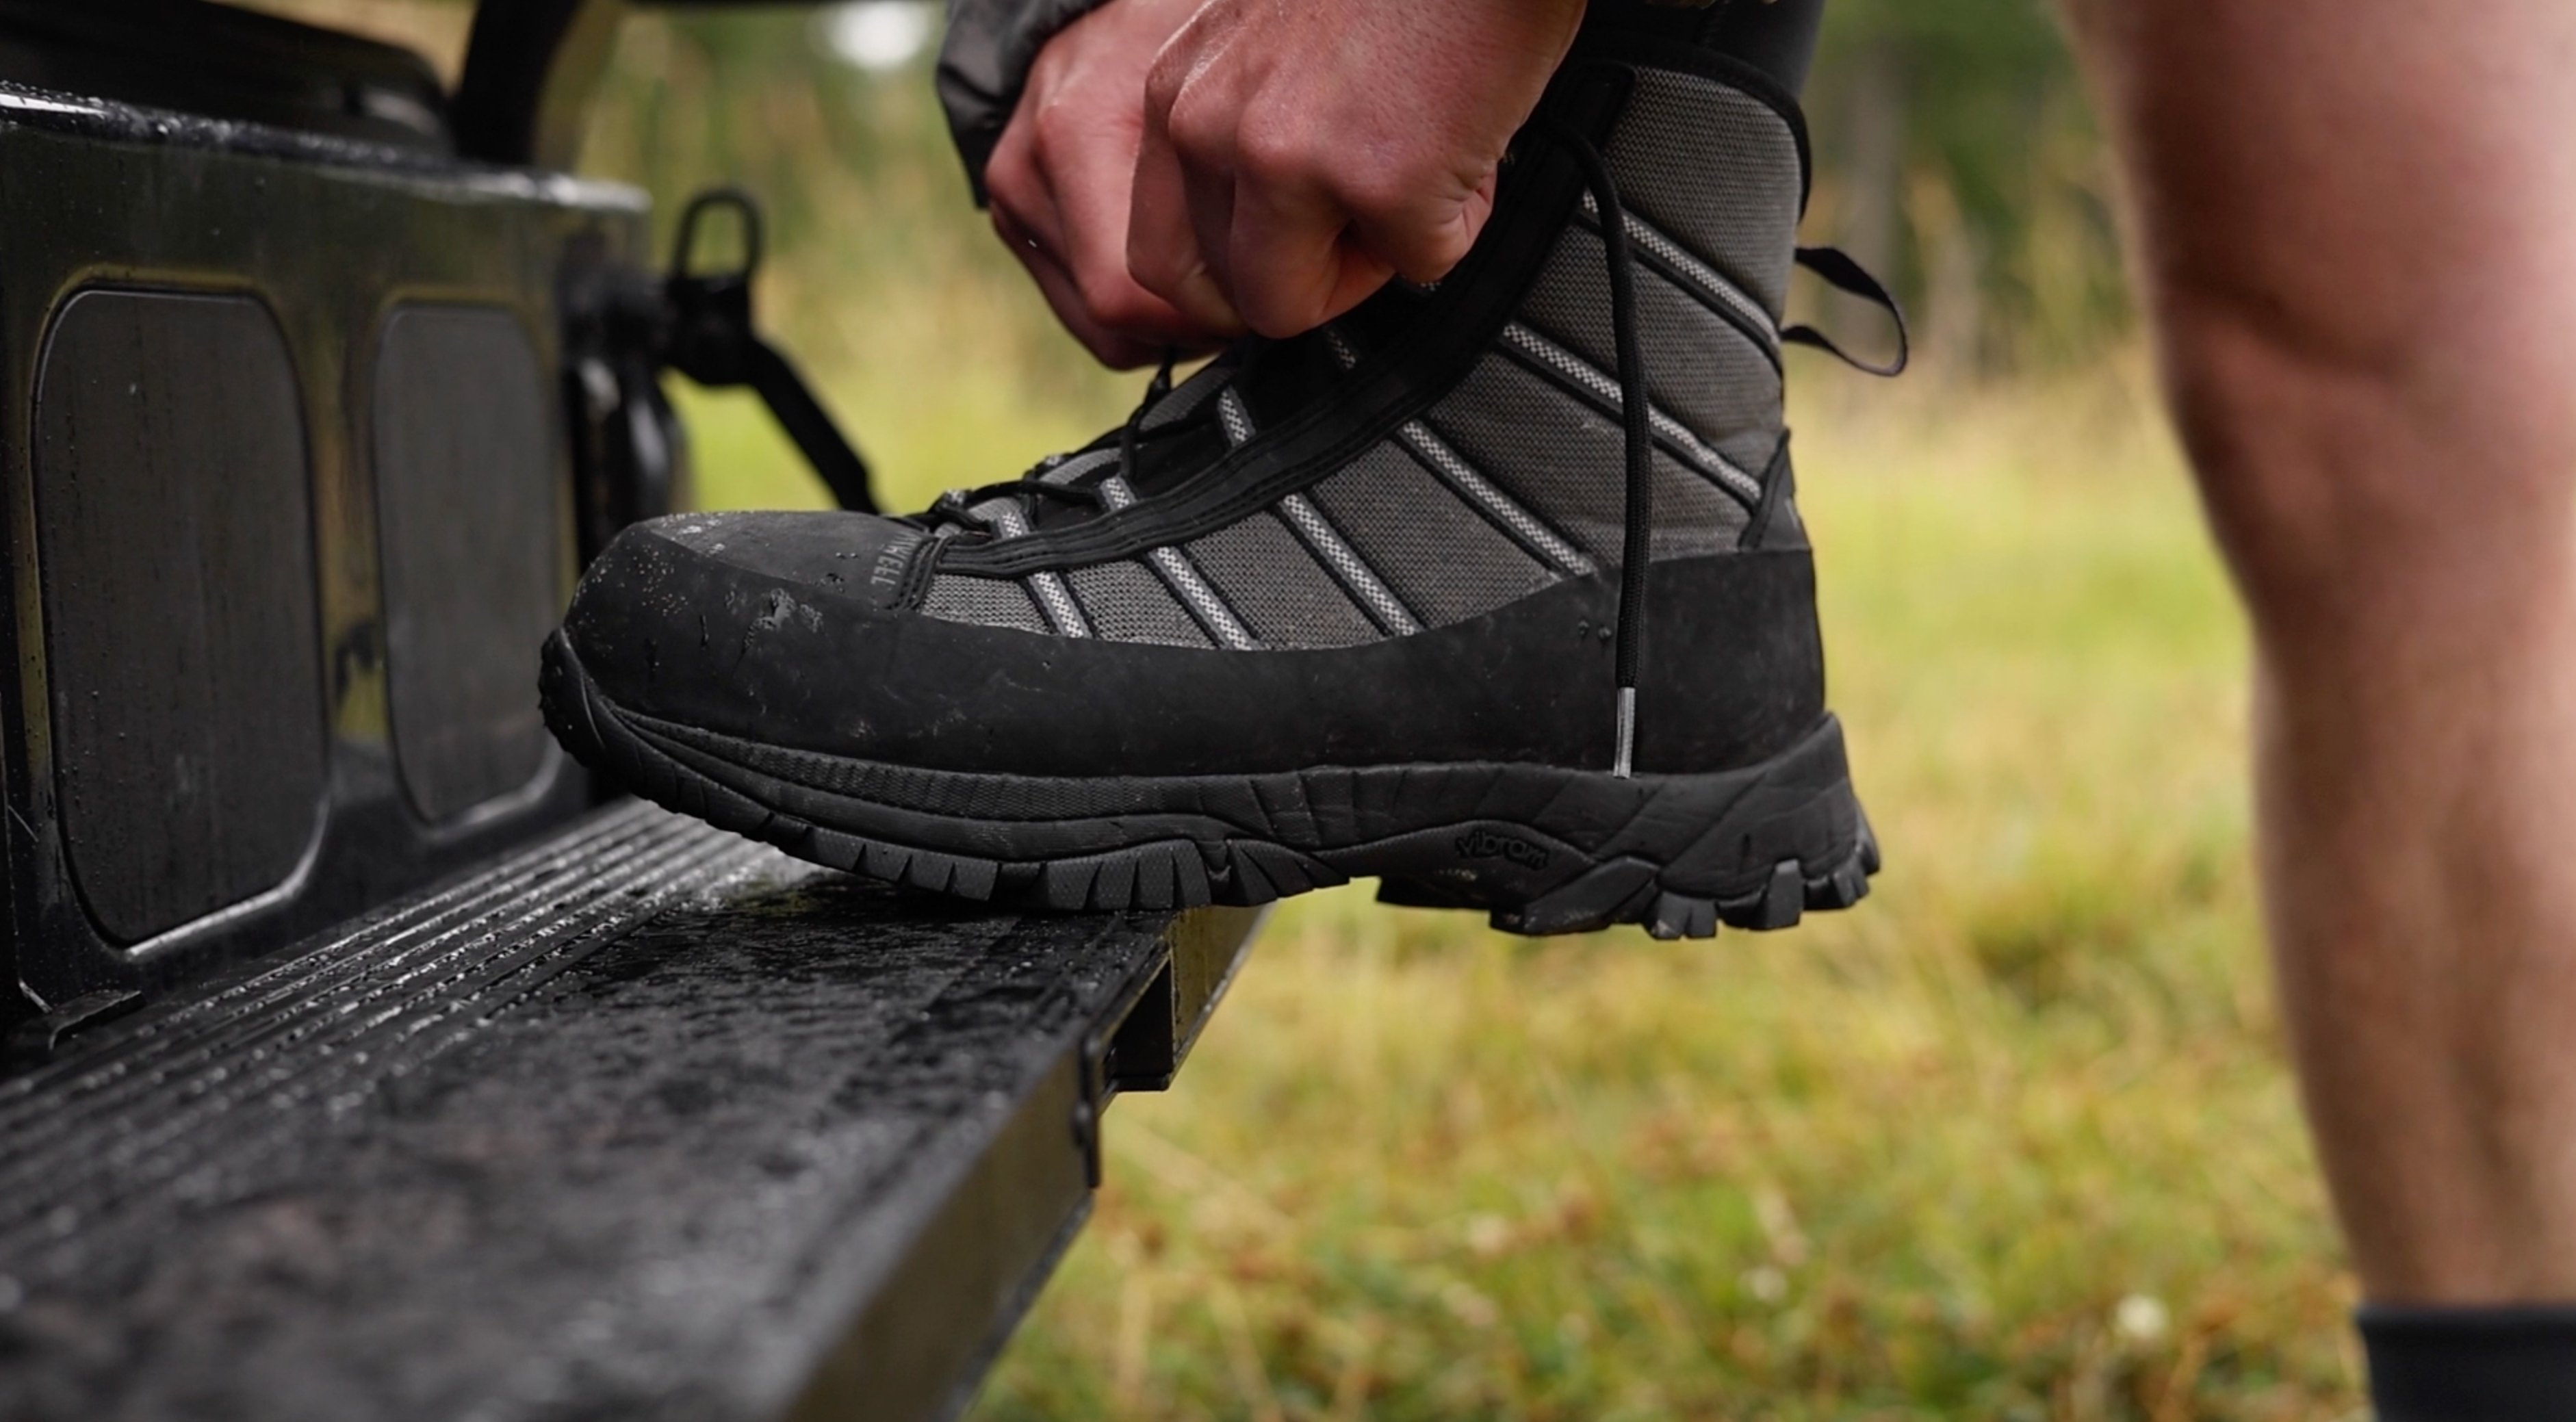 Footwear - Wading Boots by Simms Fishing Products, Patagonia and Korkers